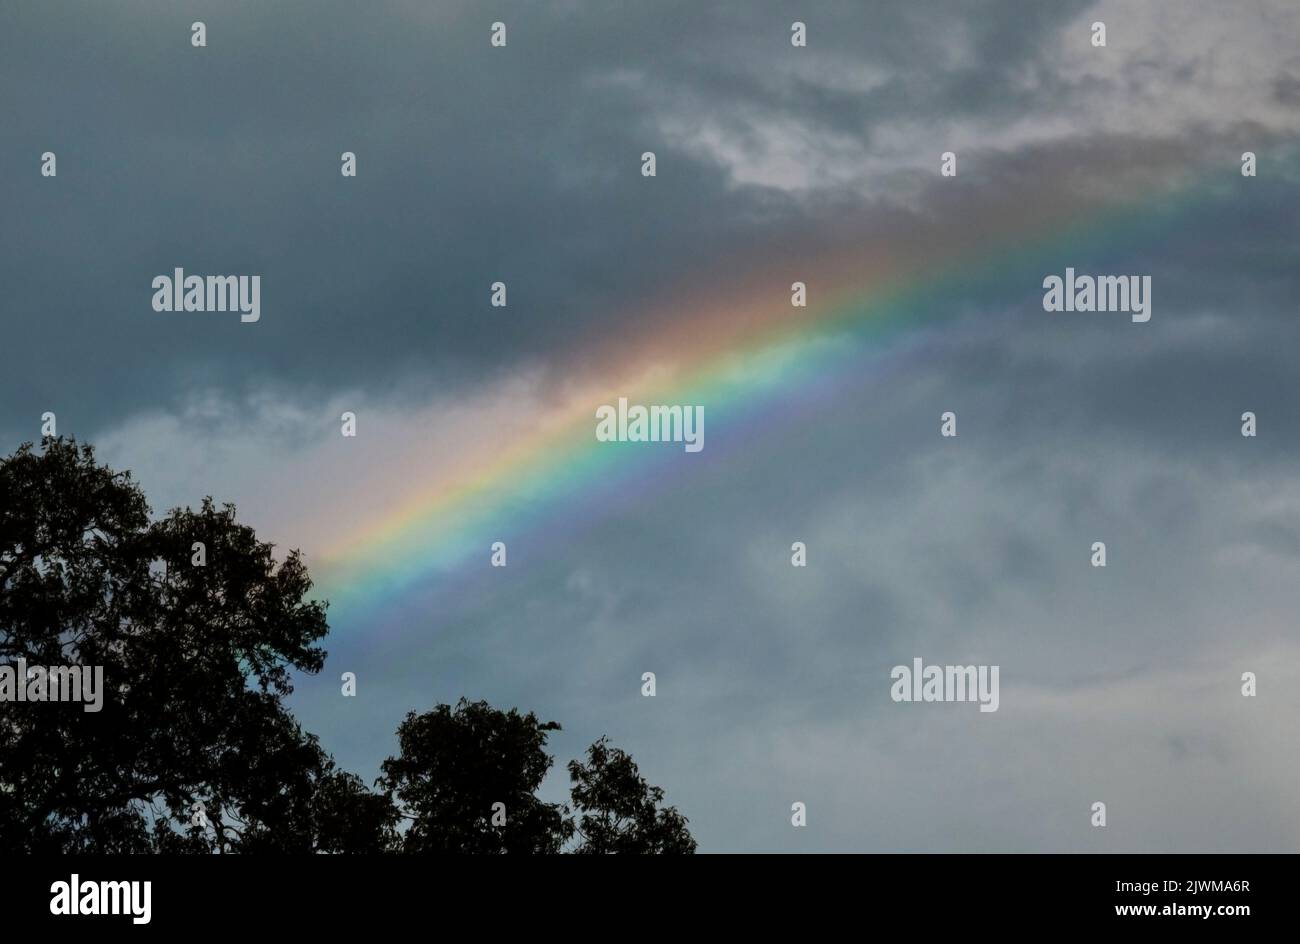 After a cloudy and stormy day, a rainbow starts to appear over North Central Florida. Stock Photo